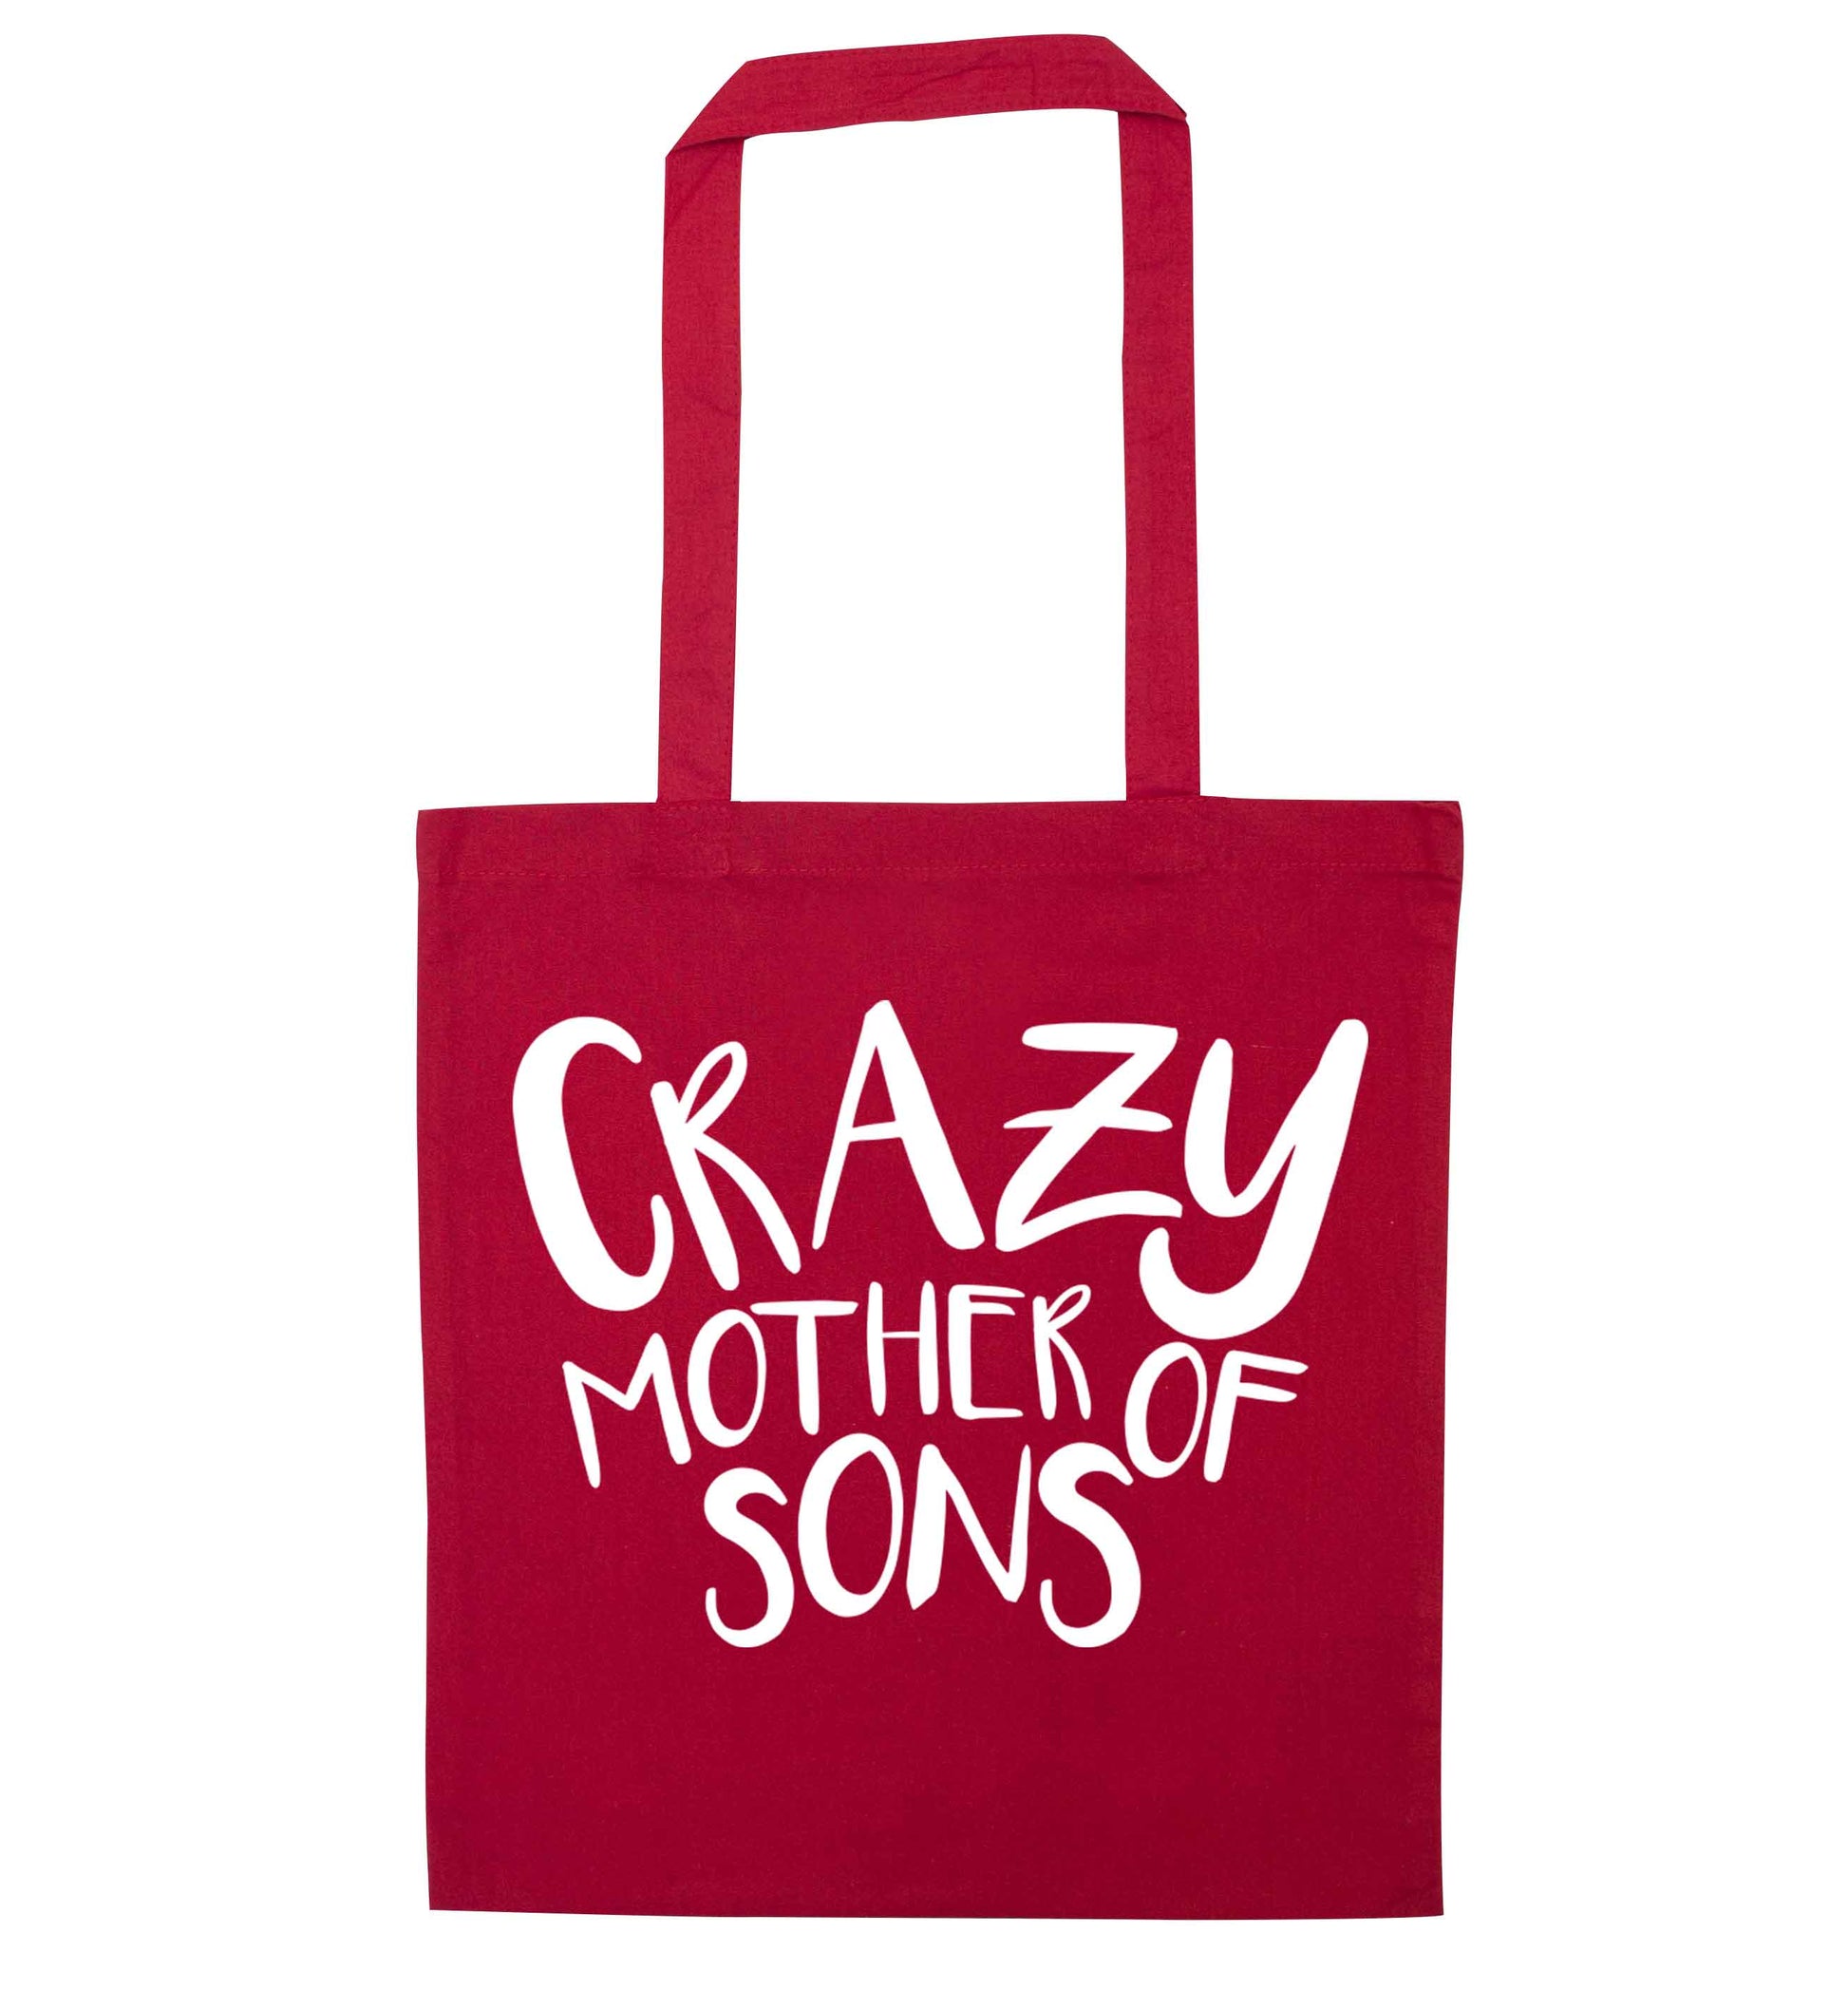 Crazy mother of sons red tote bag